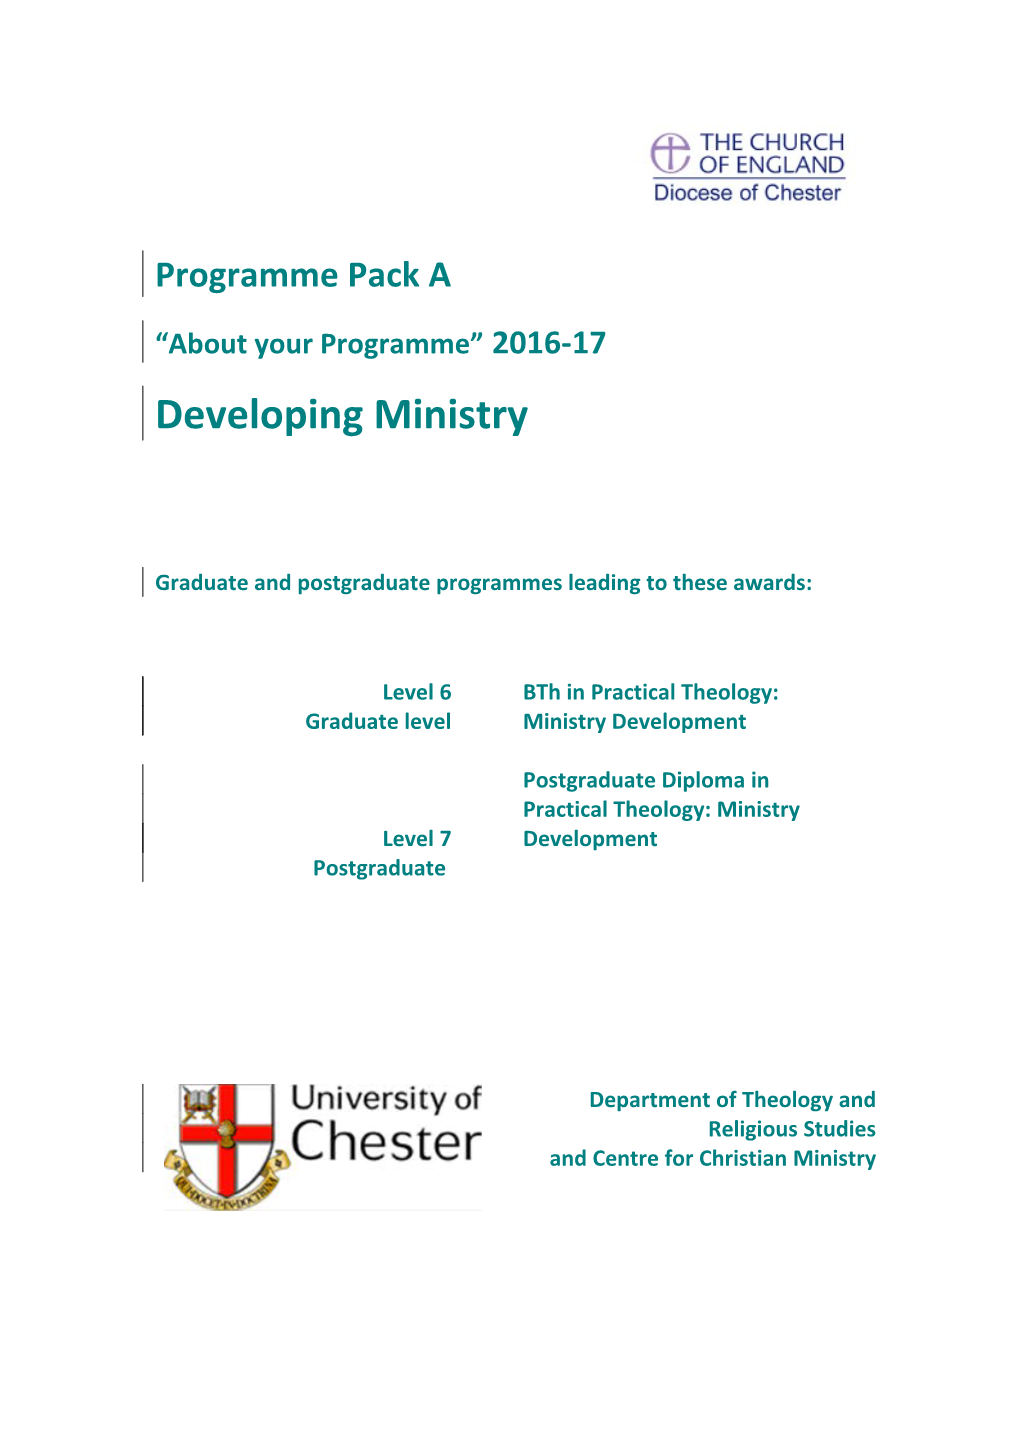 Programme Pack A